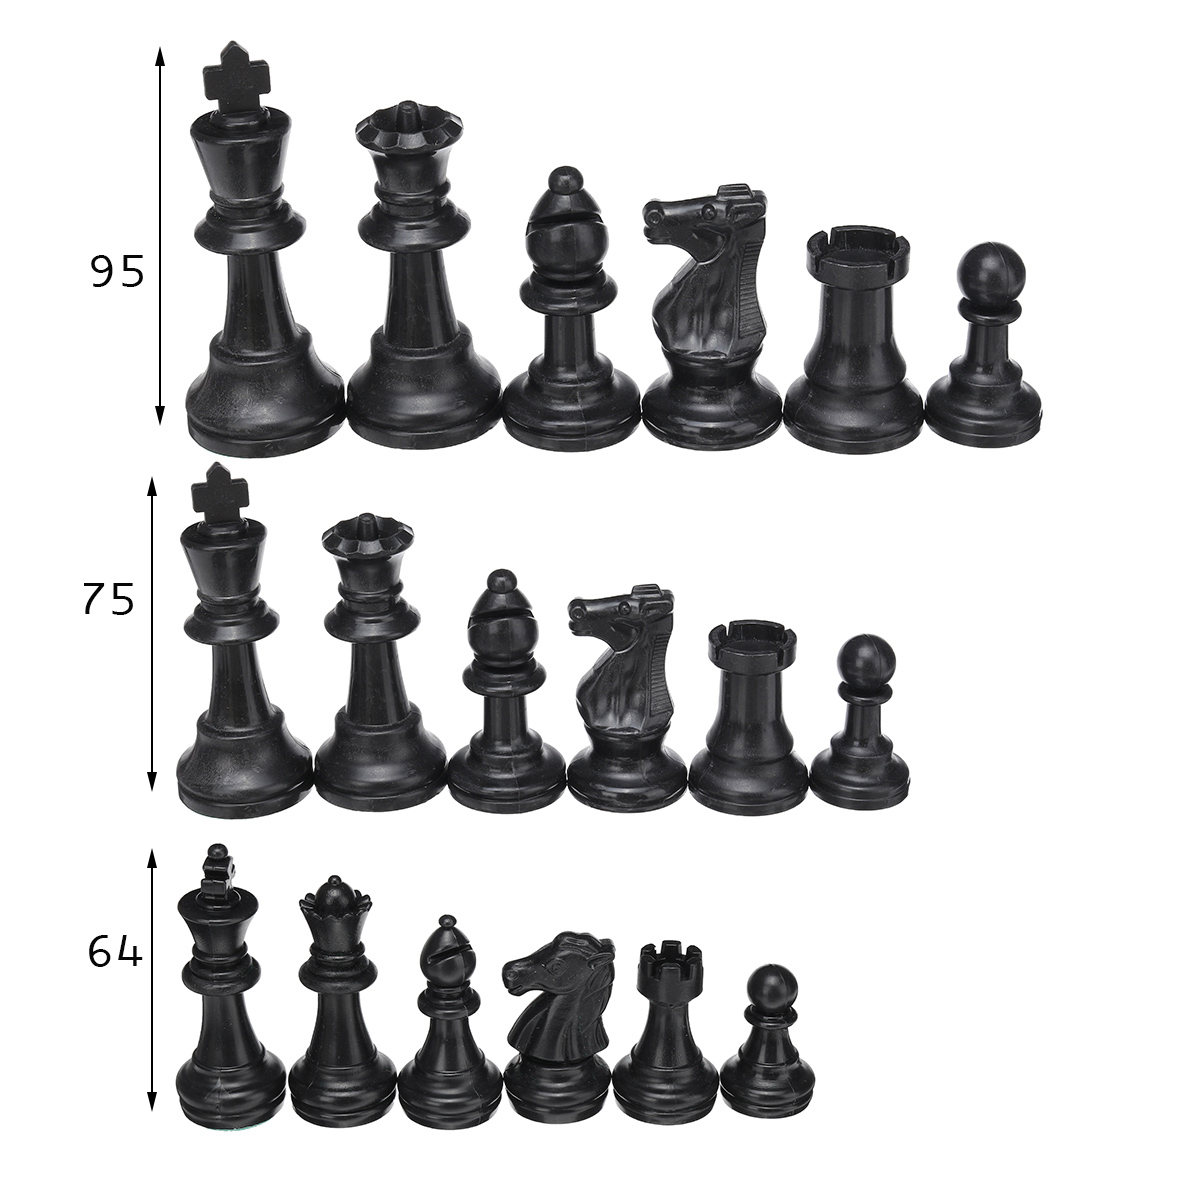 32-Piece-Game-Chess-Foldable-957564cm-King-Knight-Set-Outdoor-Recreation-Family-Camping-Game-1638530-2